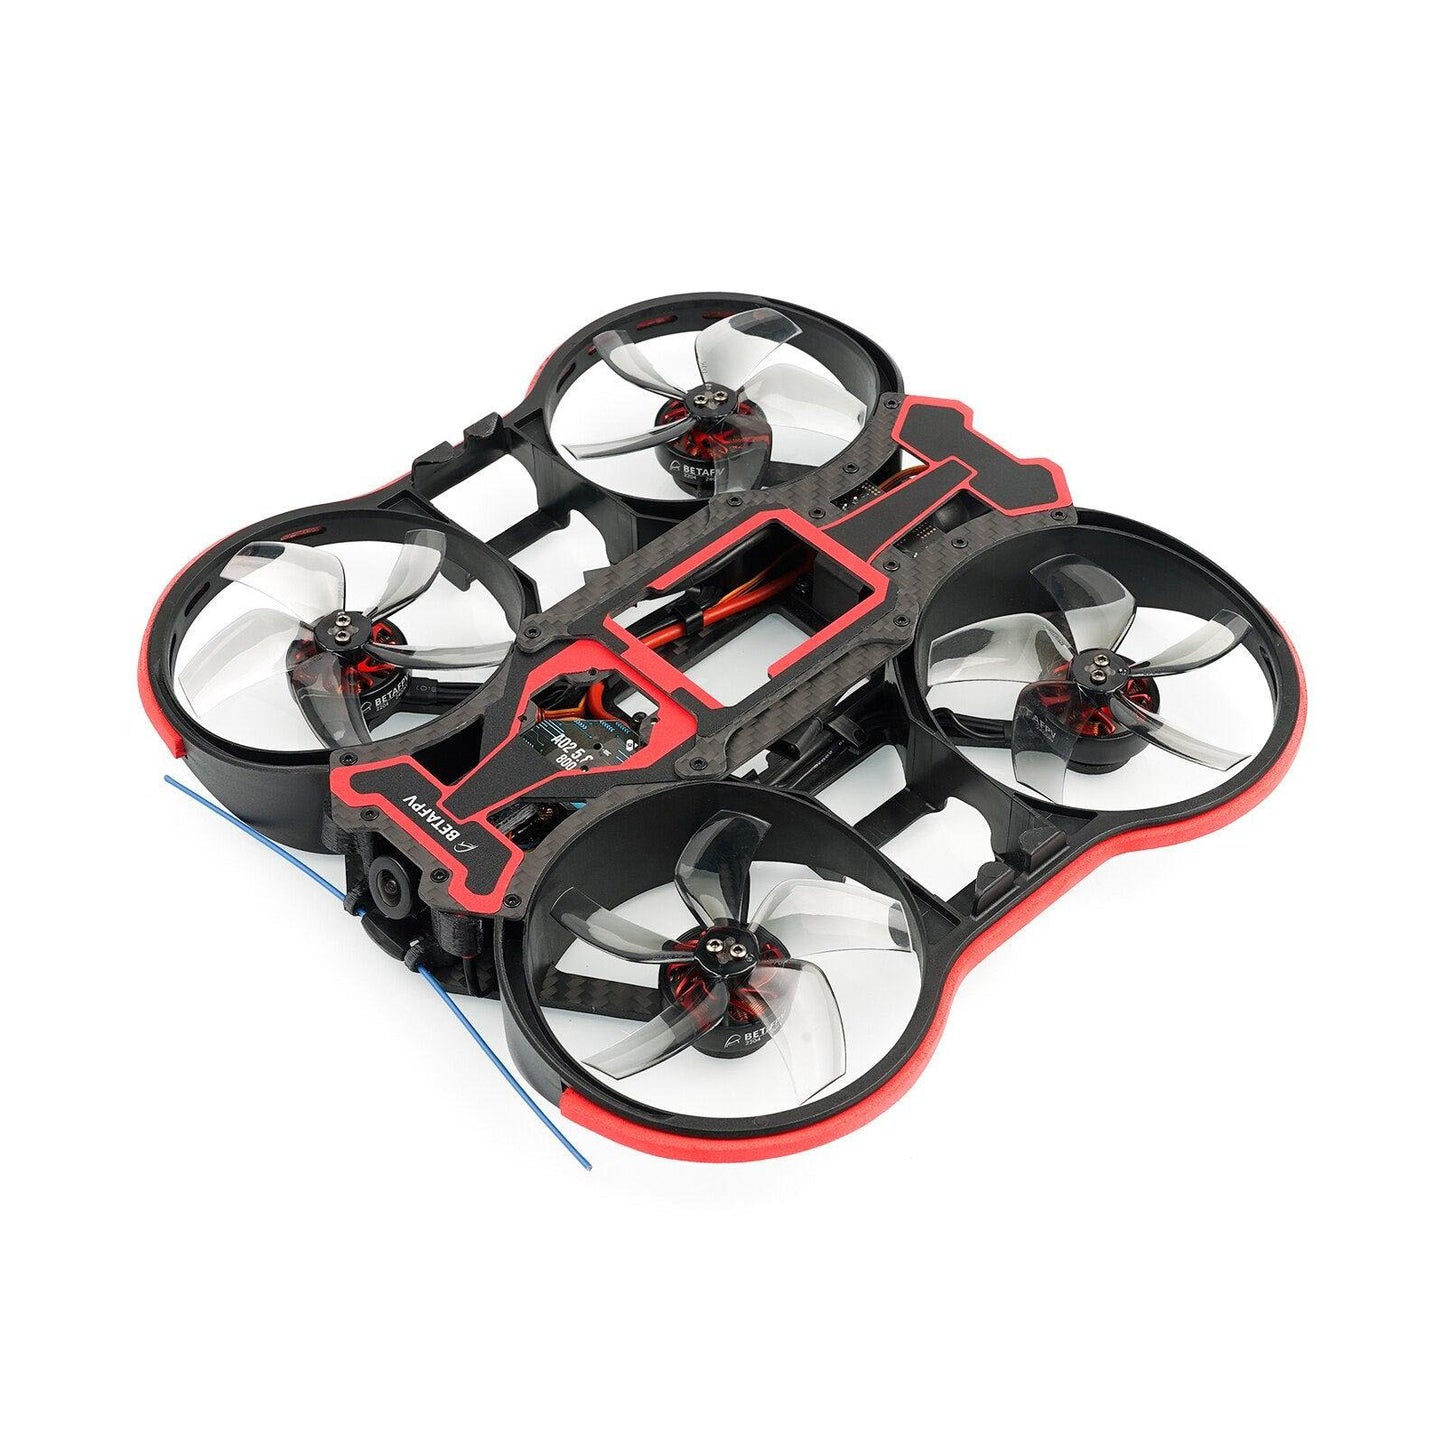 BETAFPV Pavo360 FPV Drone Quadcopter Brushless Racing RC Drone New Arrivial